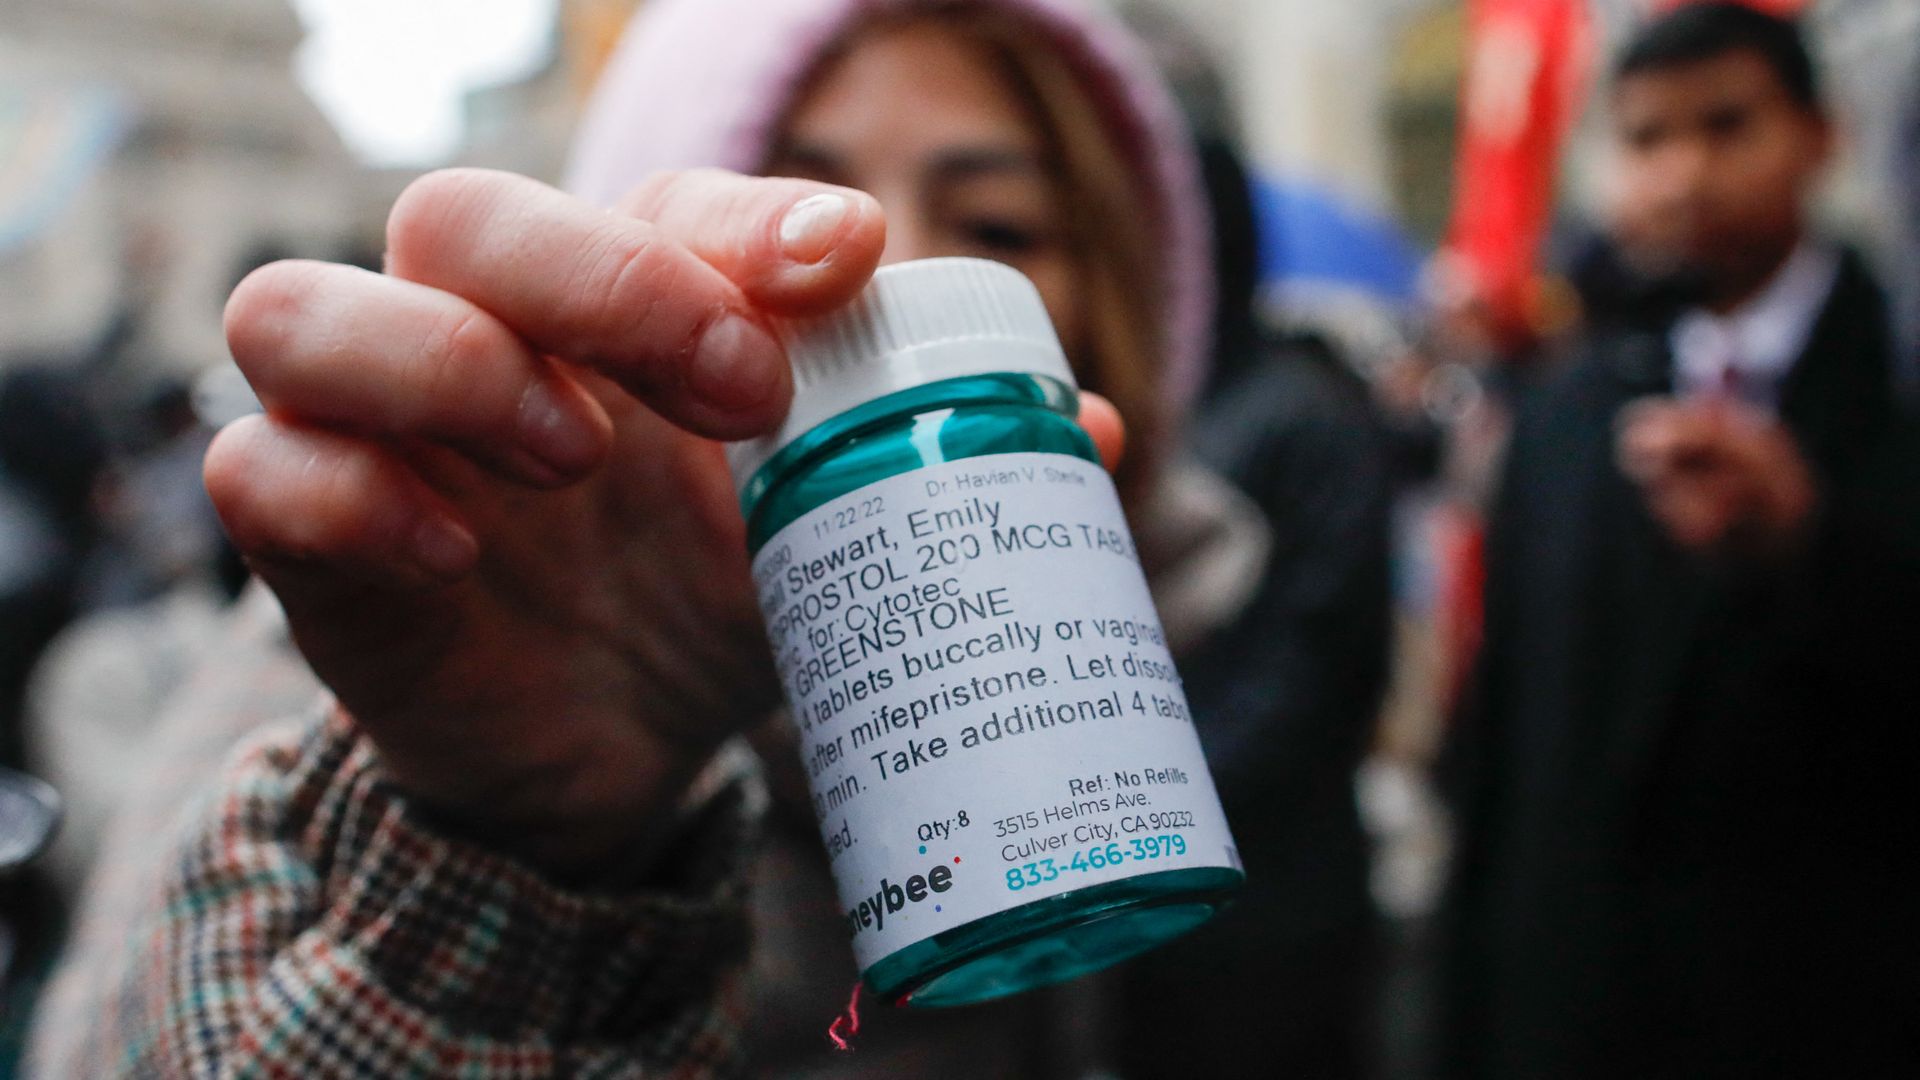 Picture of a hand holding a green medication bottle with a label that shows the drug is mifepristone